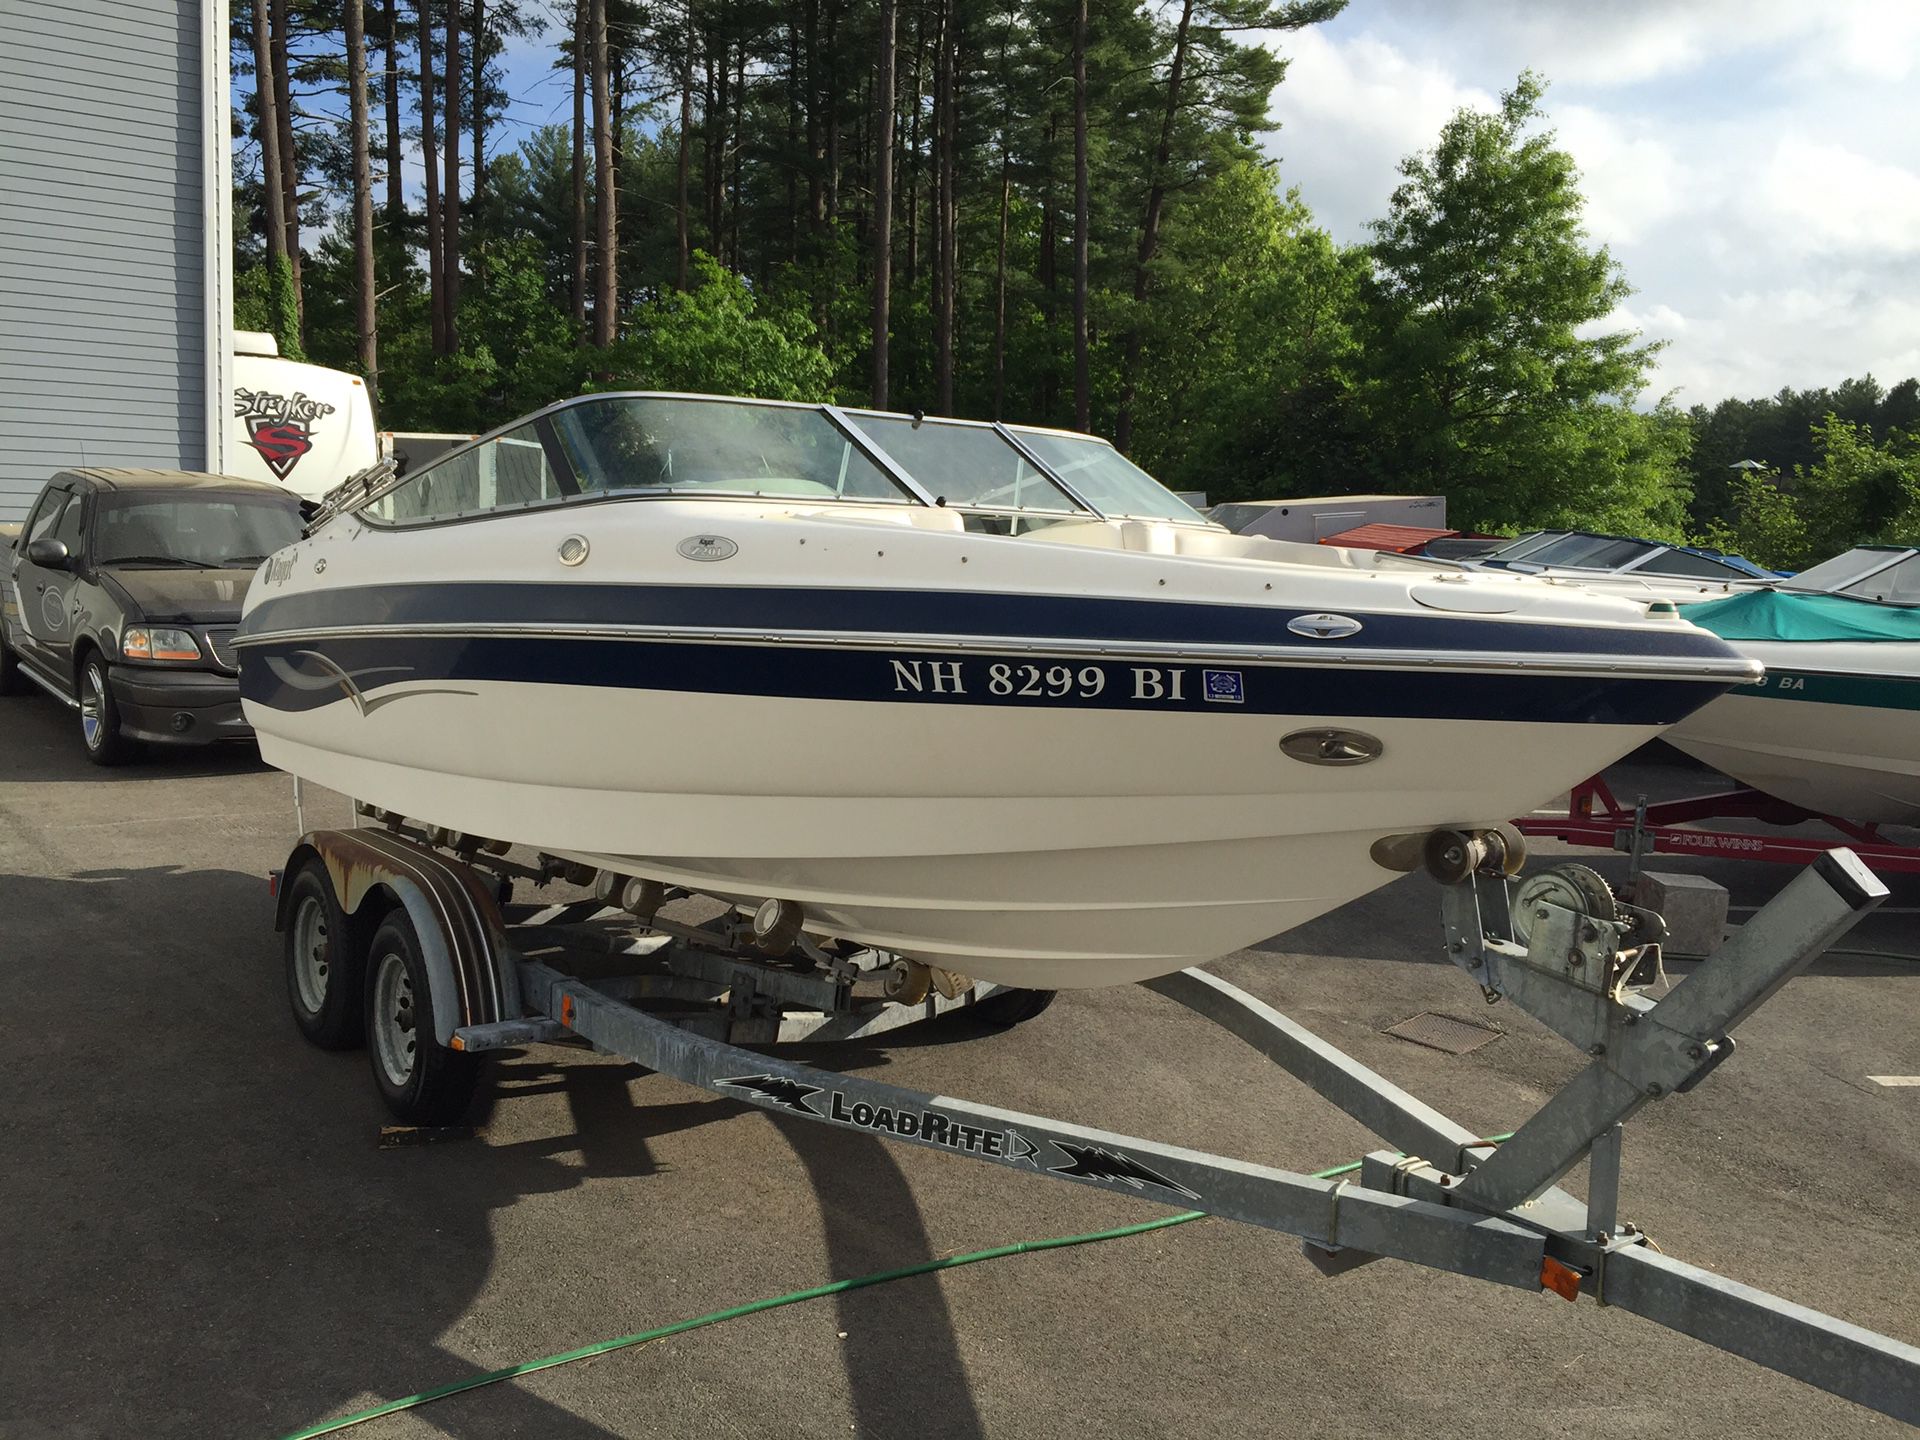 2003 Kayot z201 bowrider 20’ boat 5.0L Volvo Pentax with trailer will trade